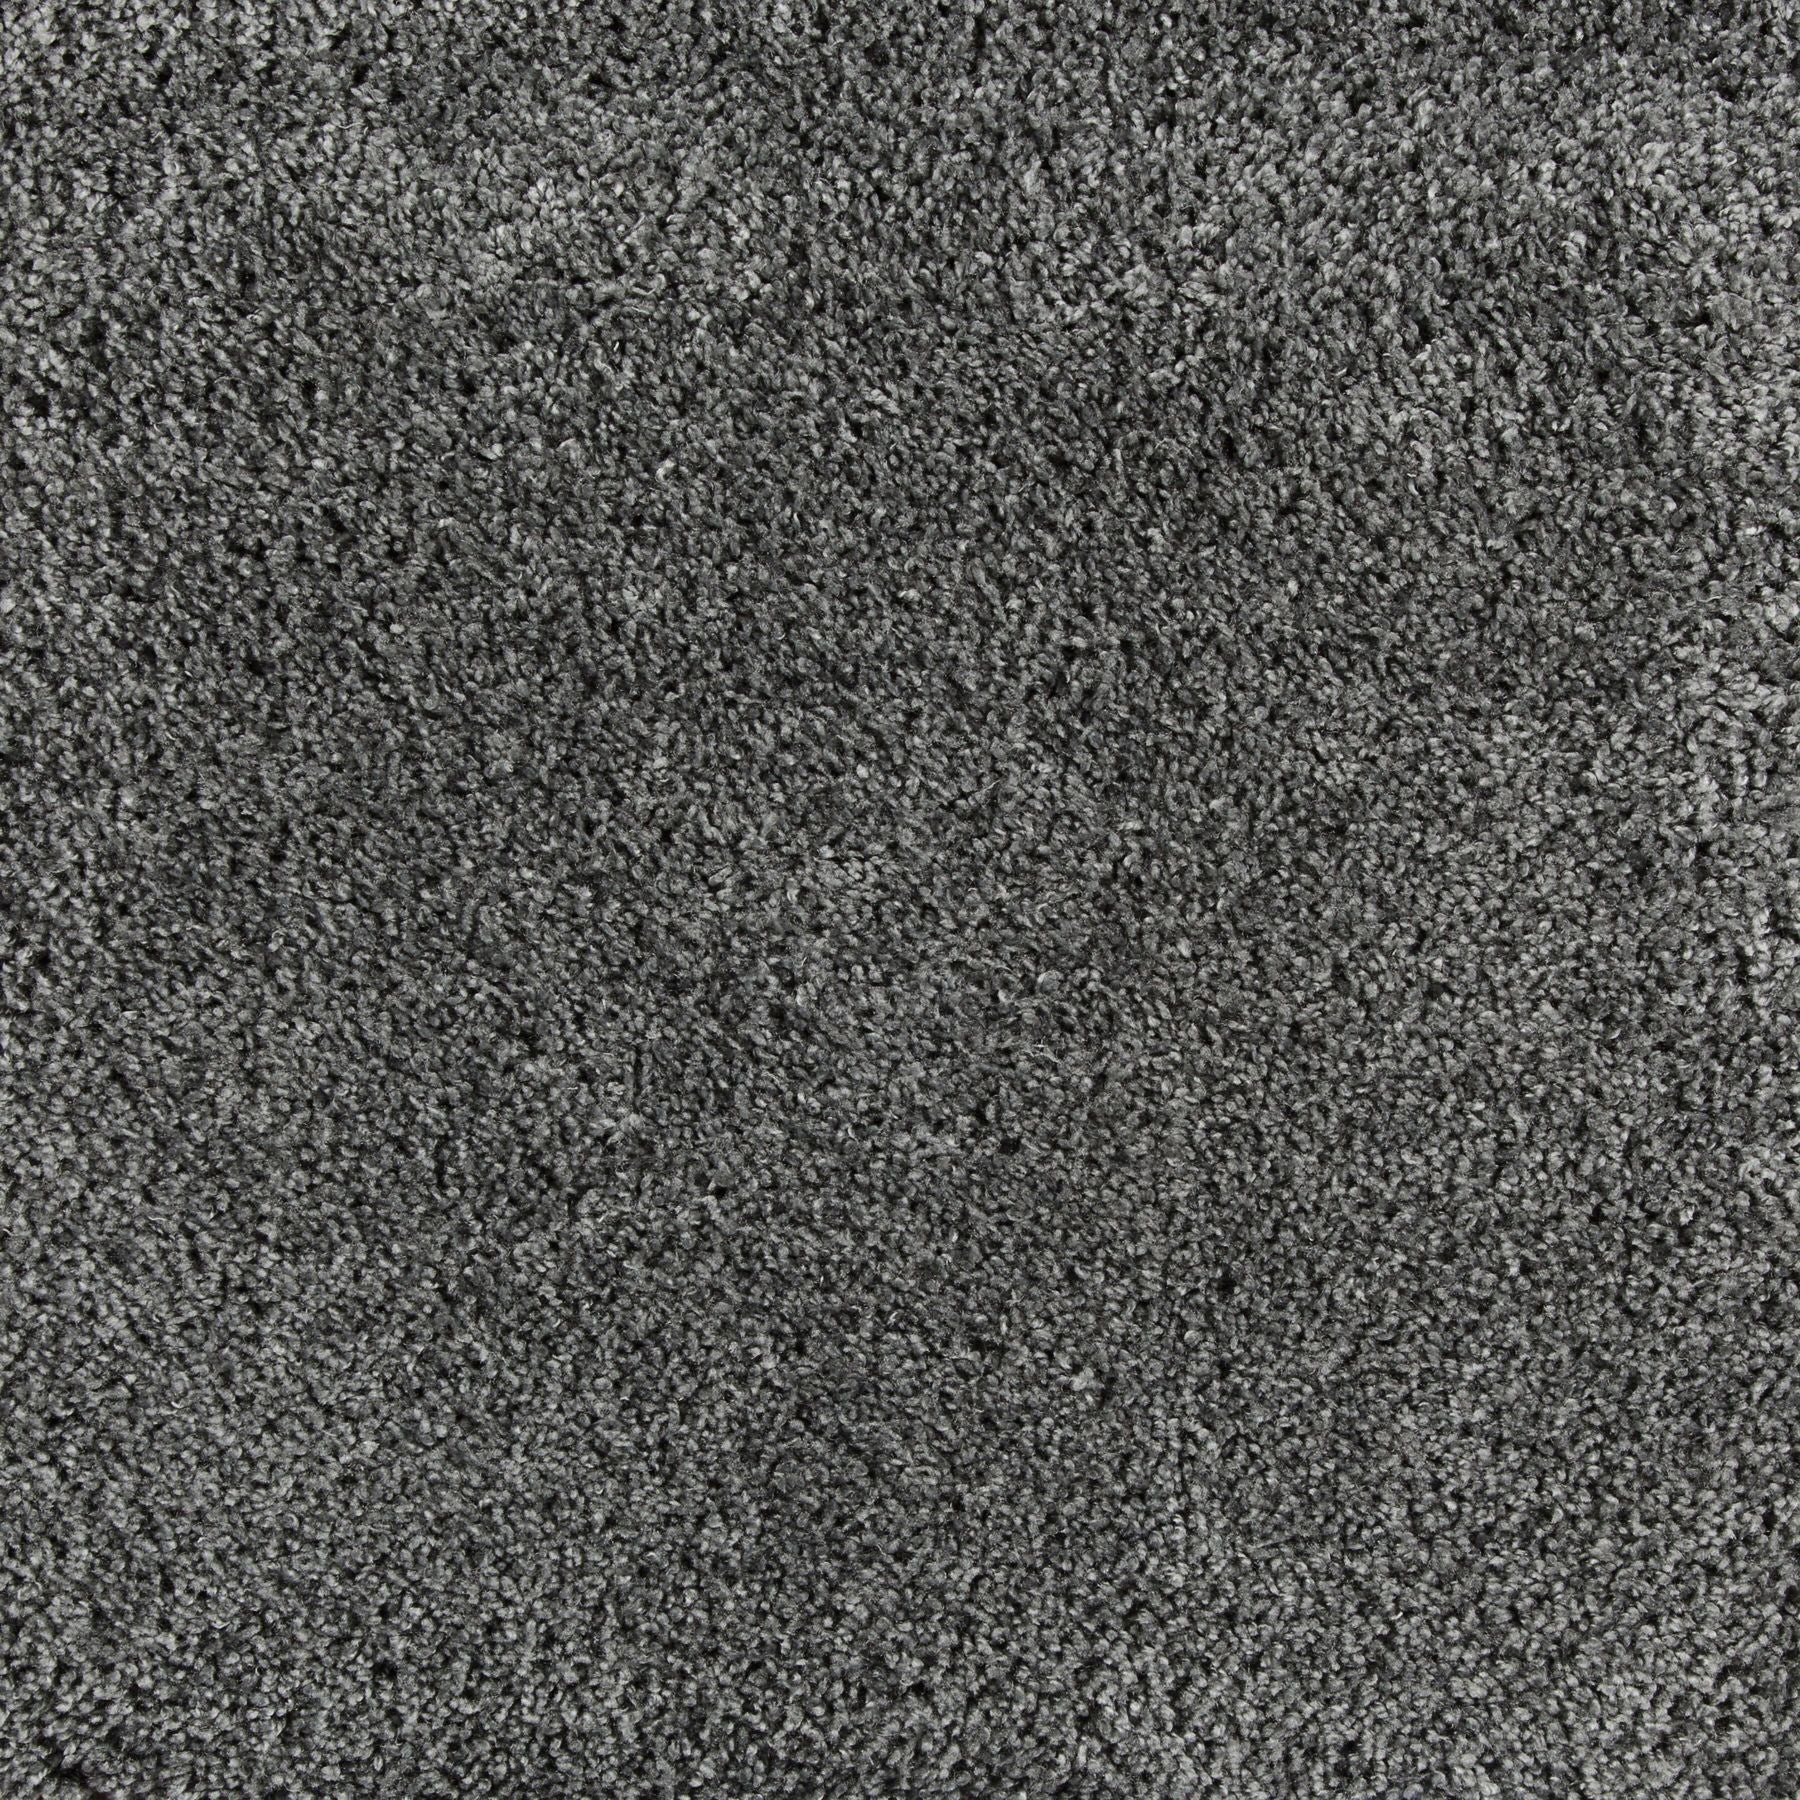 Synthetic broadloom carpet swatch in a cut pile texture in charcoal.